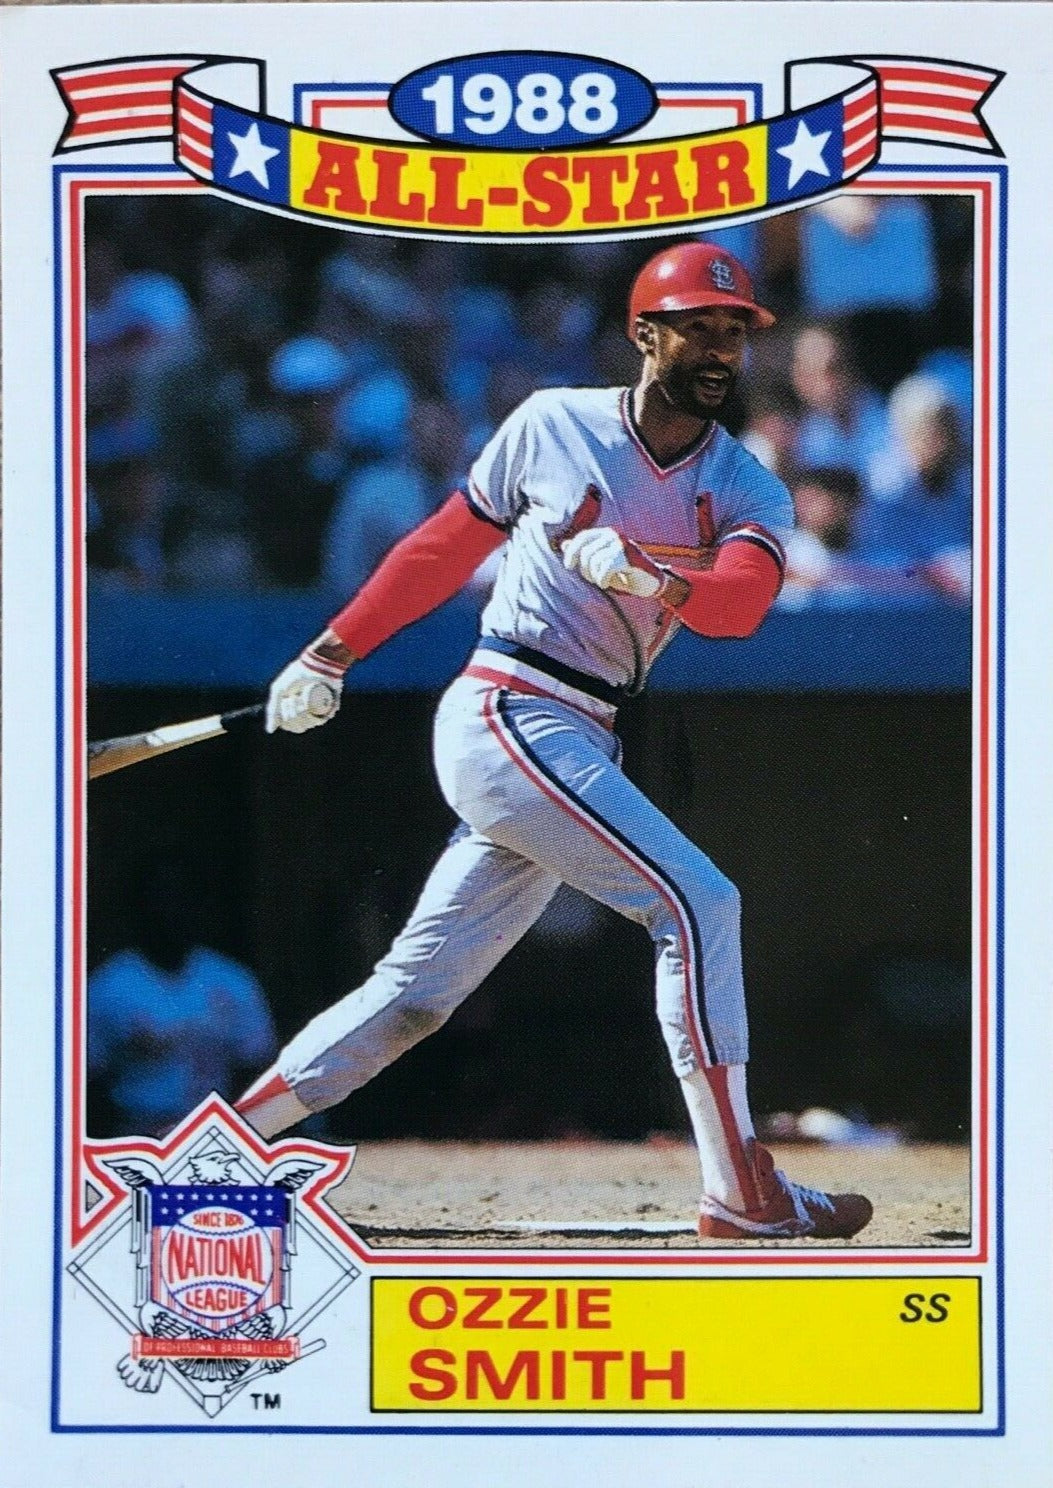 Ozzie Smith 1989 Topps 1988 All Star Game Commemorative Series Mint Card #16